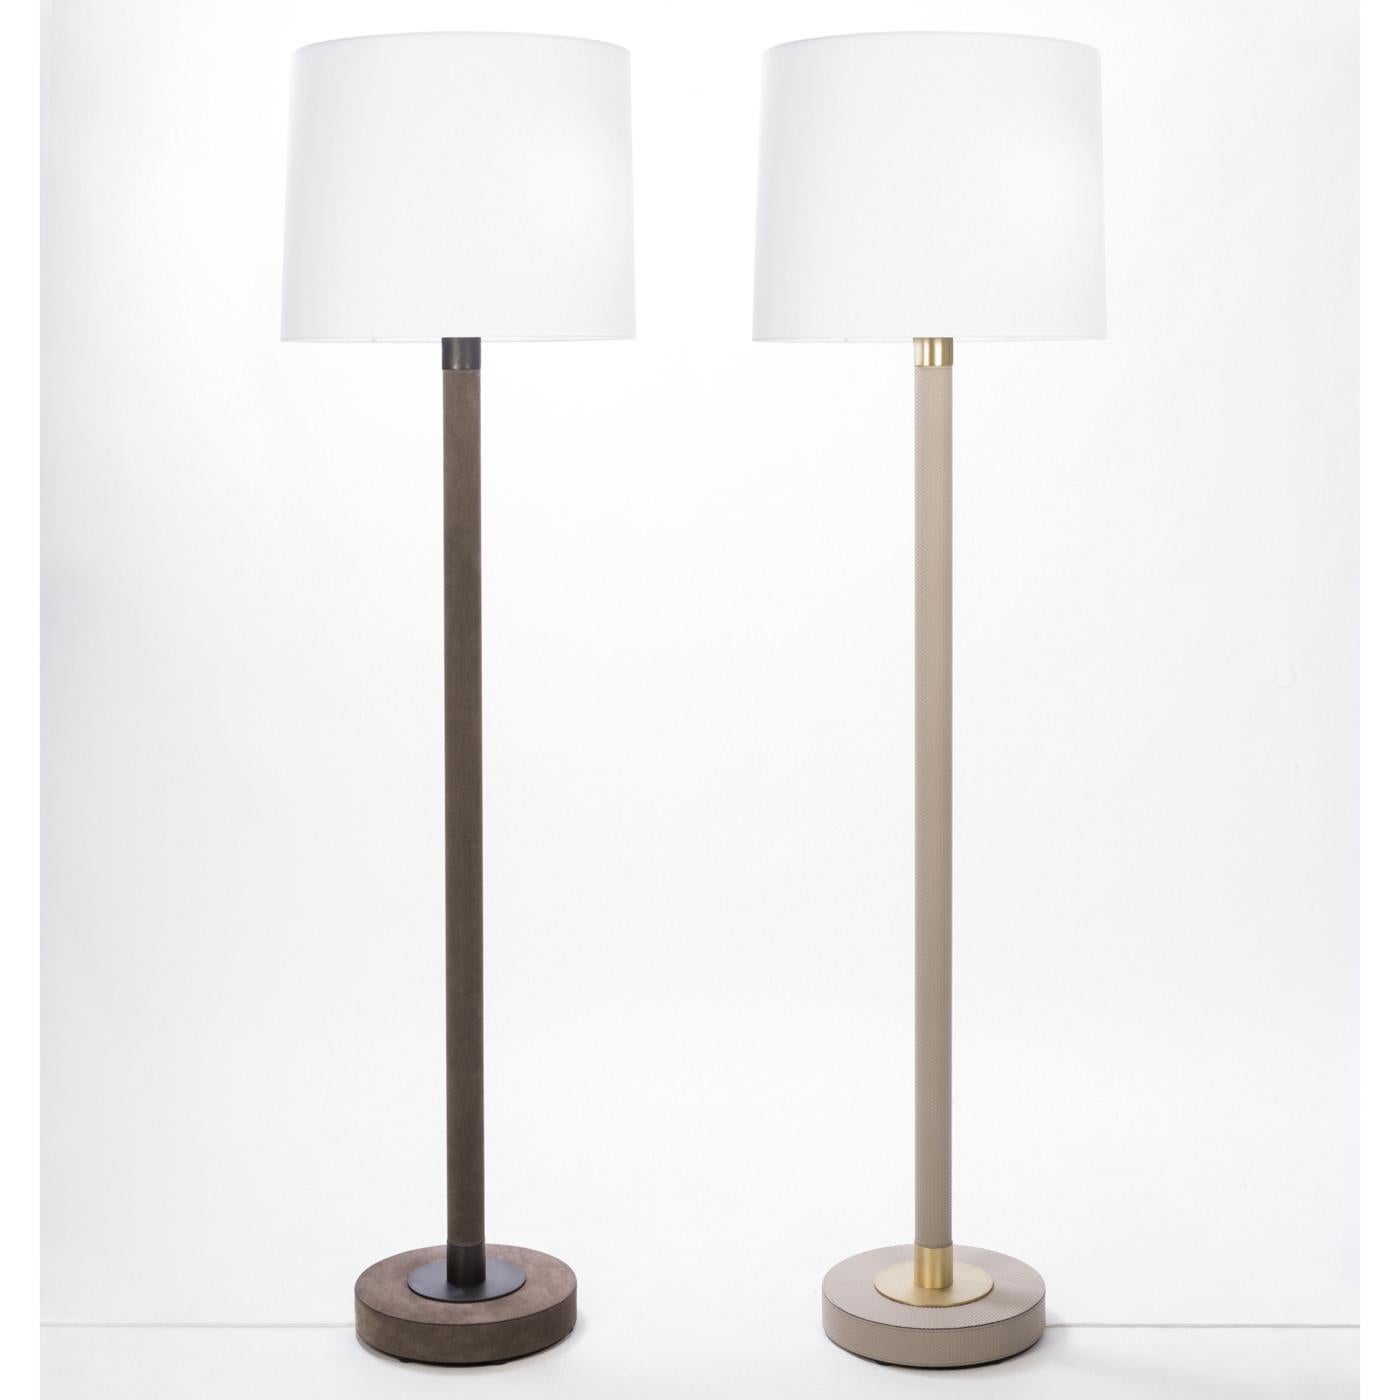 Sophisticated and timeless, this floor lamp will add subtle elegance to a modern interior thanks to its exquisite craftsmanship and delicate color palette. The wooden structure comprises a round base and a stem upholstered in leather with